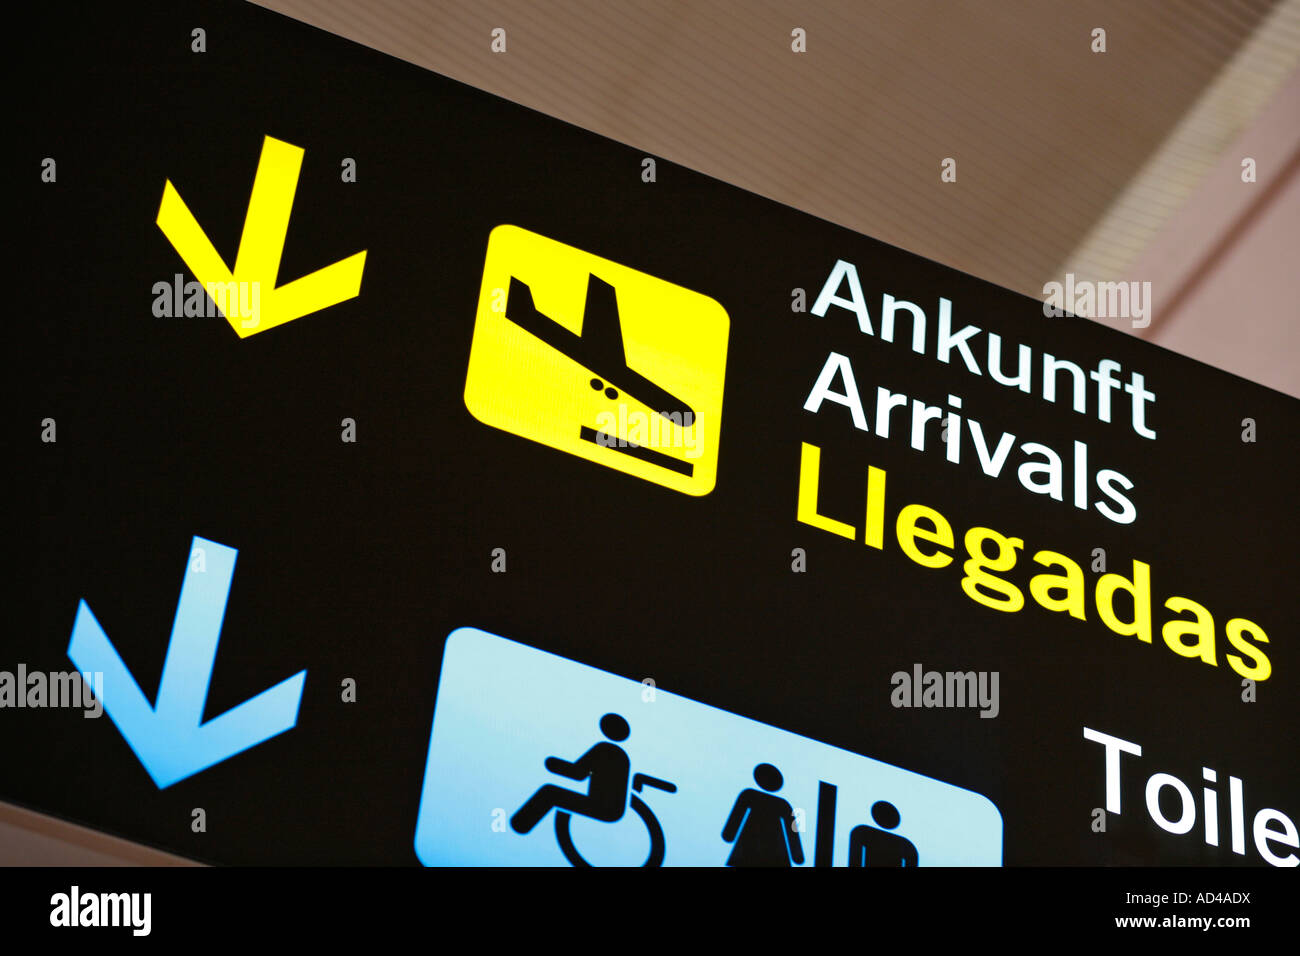 Multilingual airport sign, direction to arrivals, Malaga, Spain Stock Photo